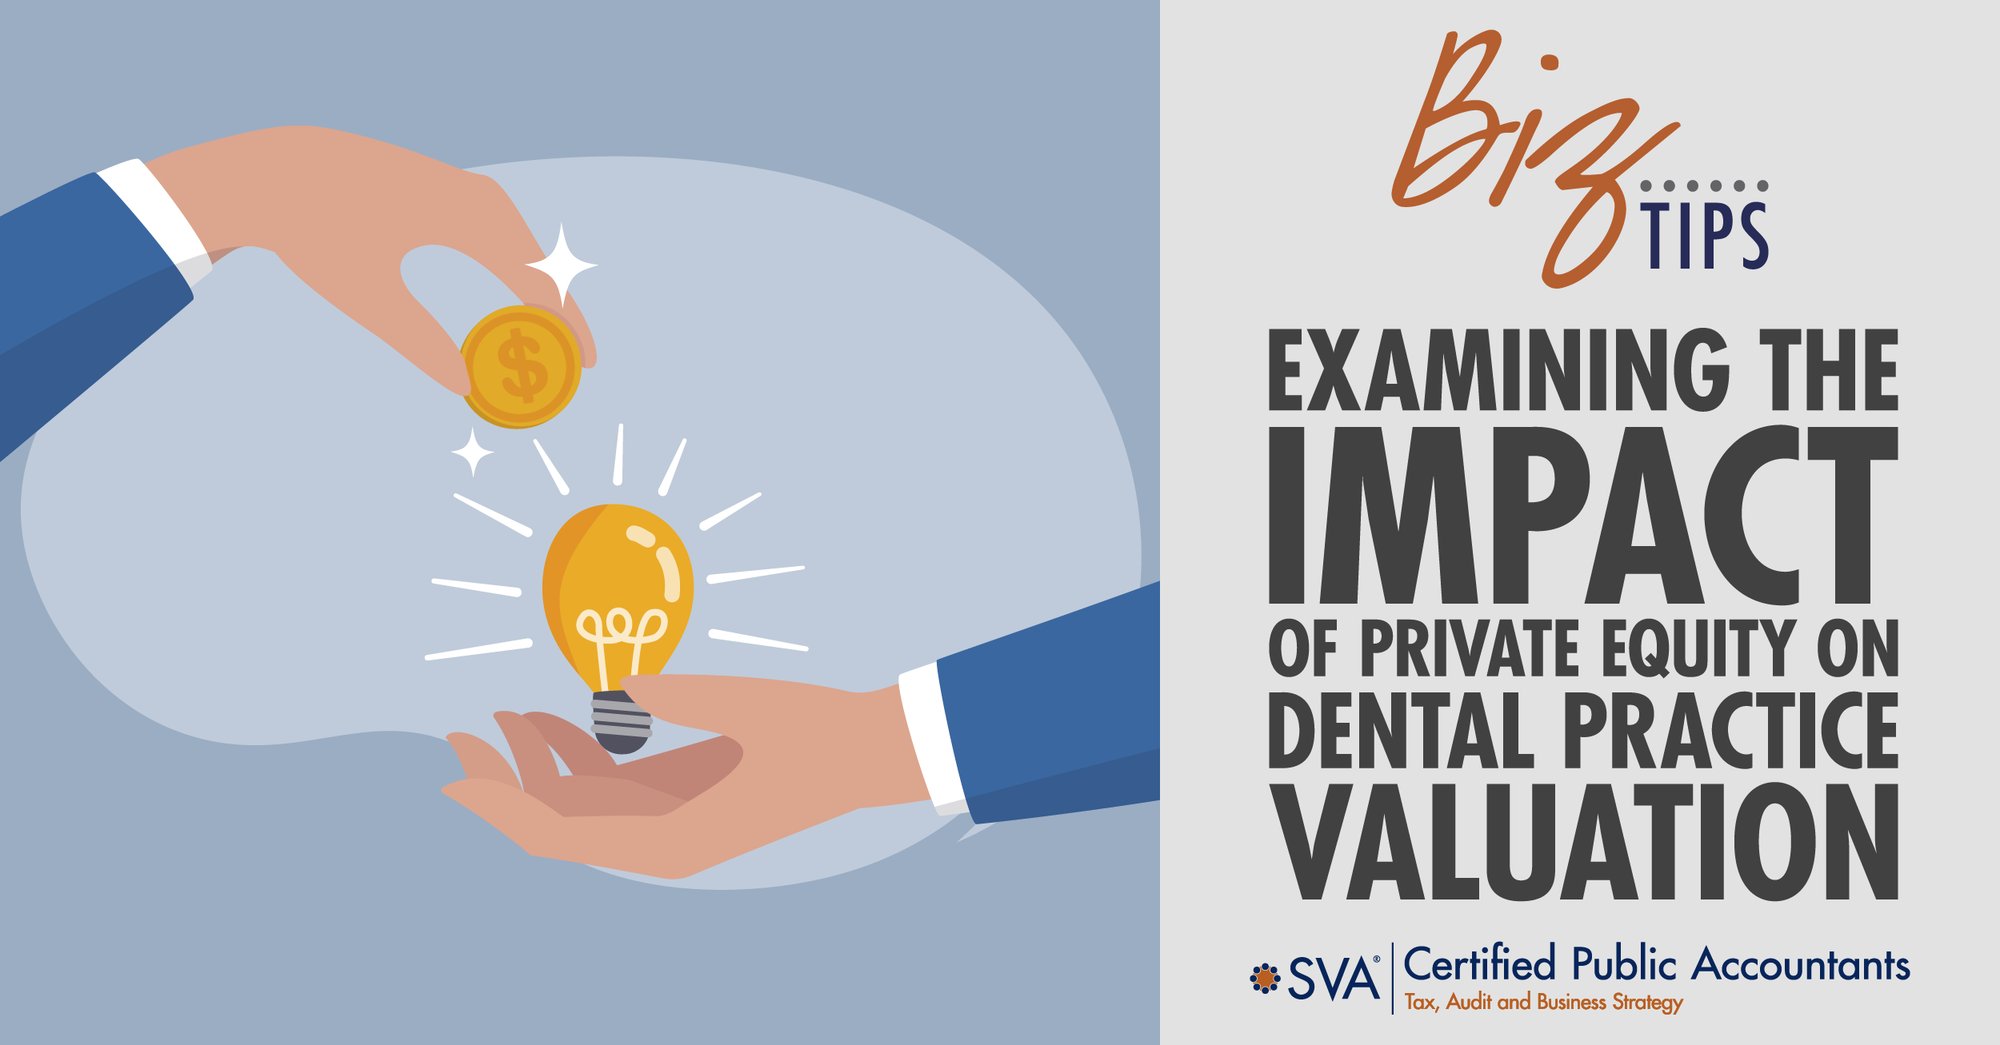 sva-certified-public-accountants-biz-tips-examining-the-impact-of-private-equity-on-dental-practice-valuation